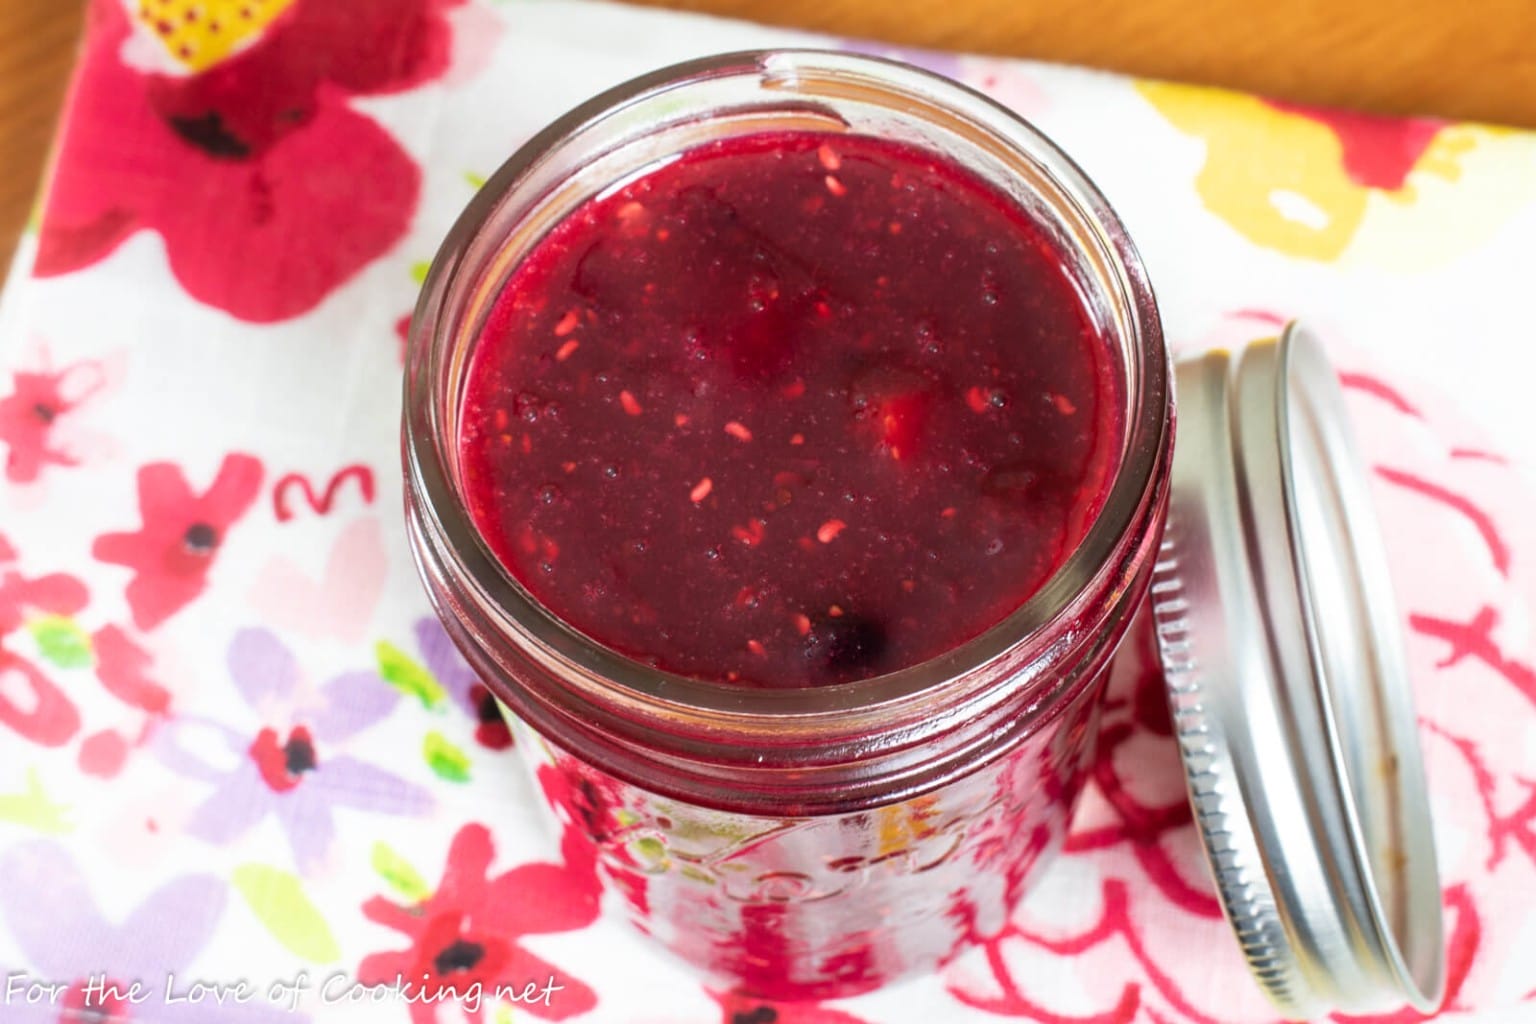 Mixed Berry Dessert Sauce | For the Love of Cooking